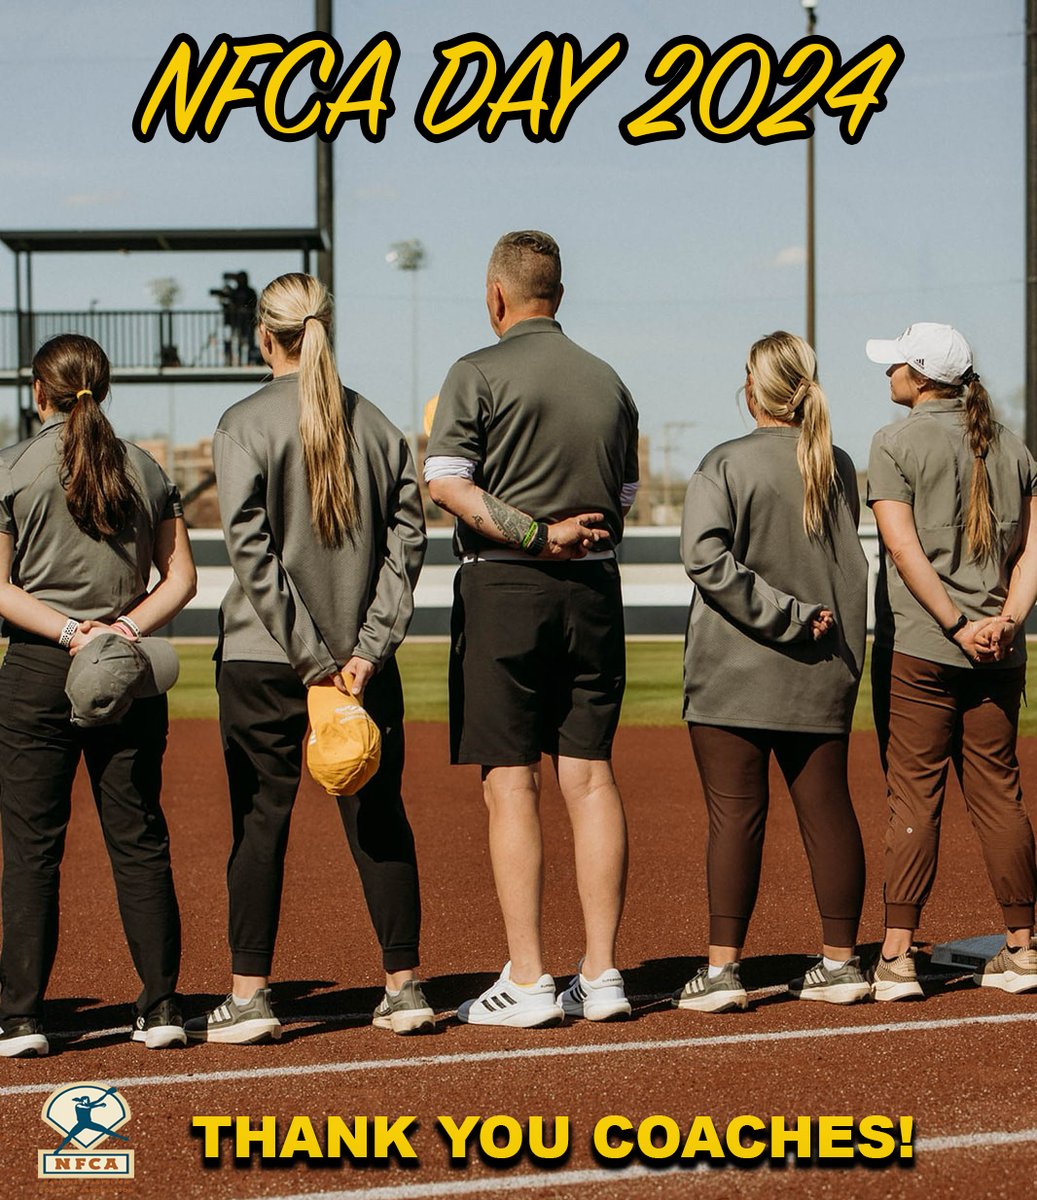 In honor of NFCA Day we would like to recognize and give a huge thank you to our coaches @marleewilson, @Coach_Mogan, @bshipman44, and @CoachErikaWhitt! We appreciate everything that you do for our program on and off the field! #BroncosReign // #NFCA // #NFCADAY